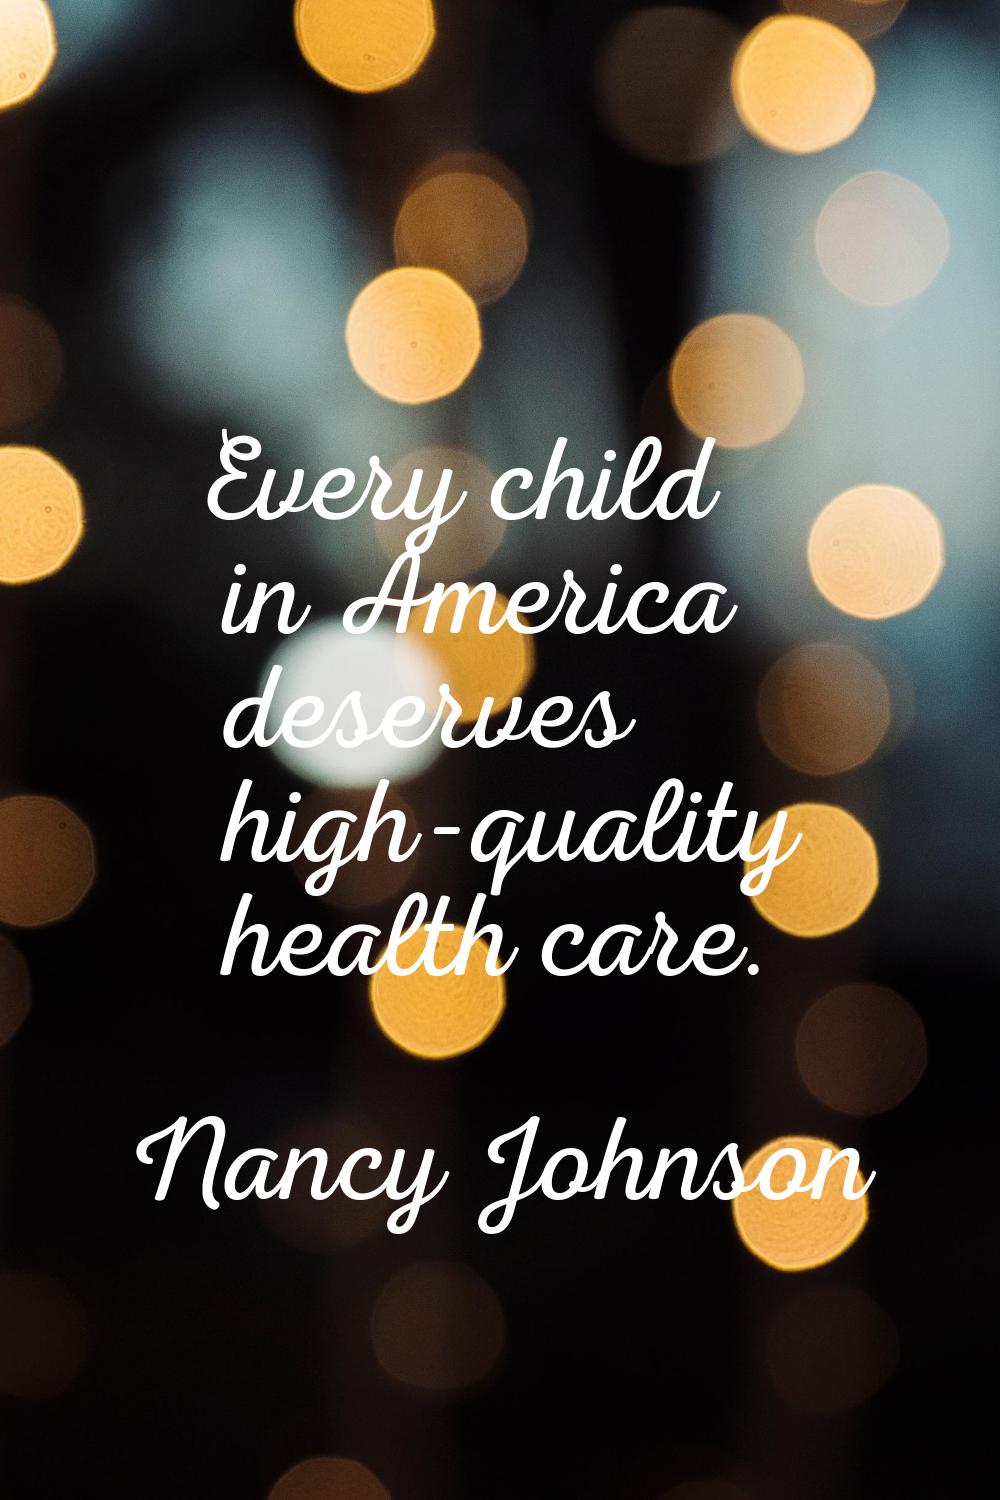 Every child in America deserves high-quality health care.